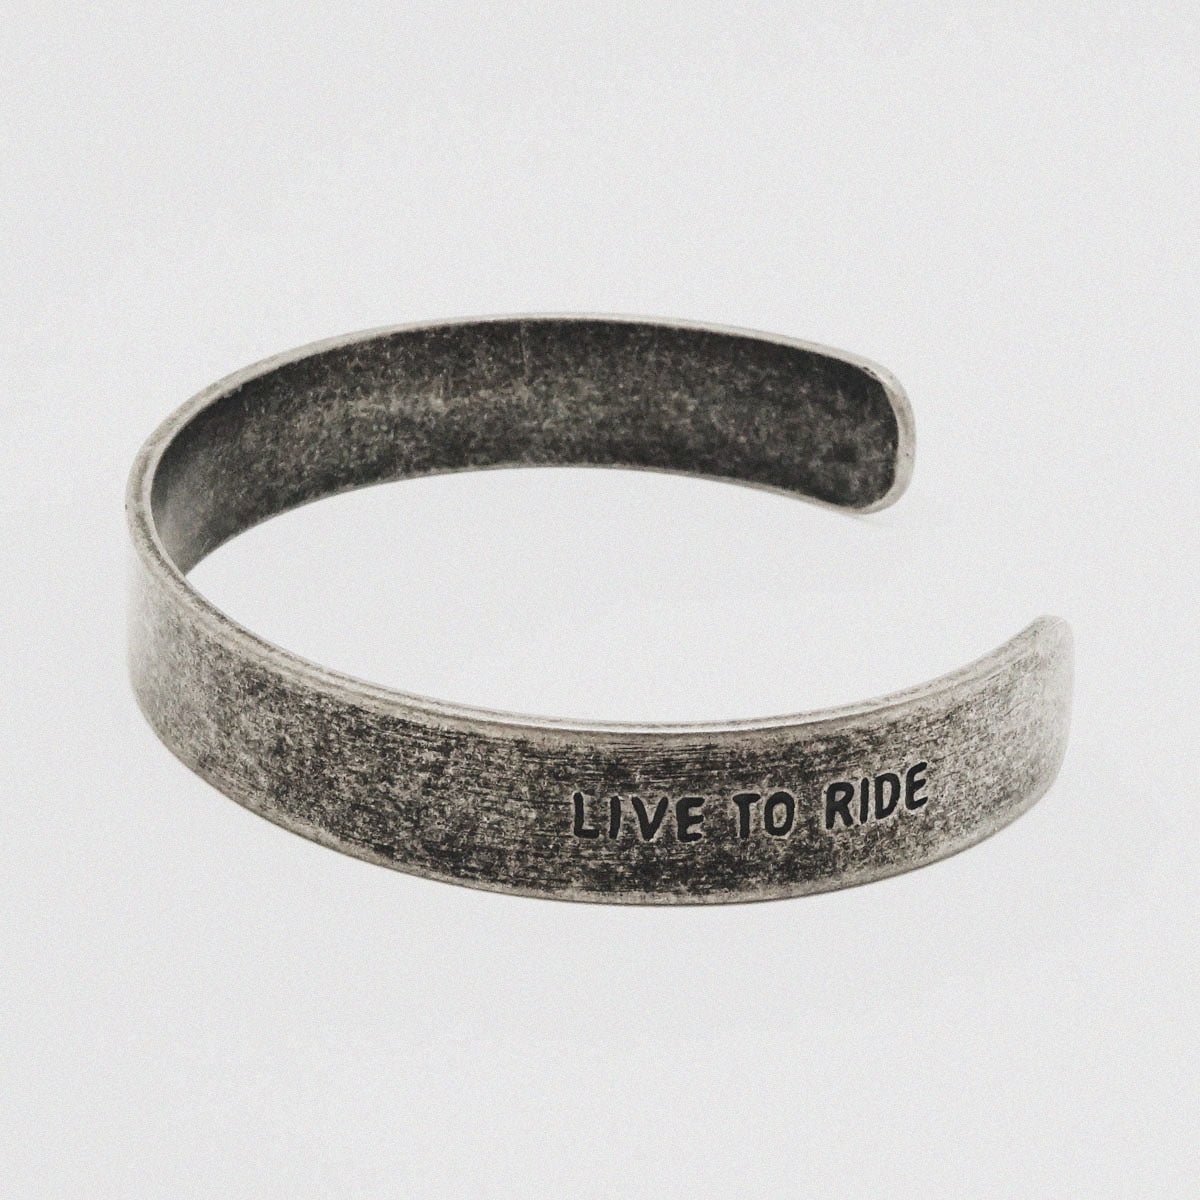 Live To Ride, Ride To Live Cuff